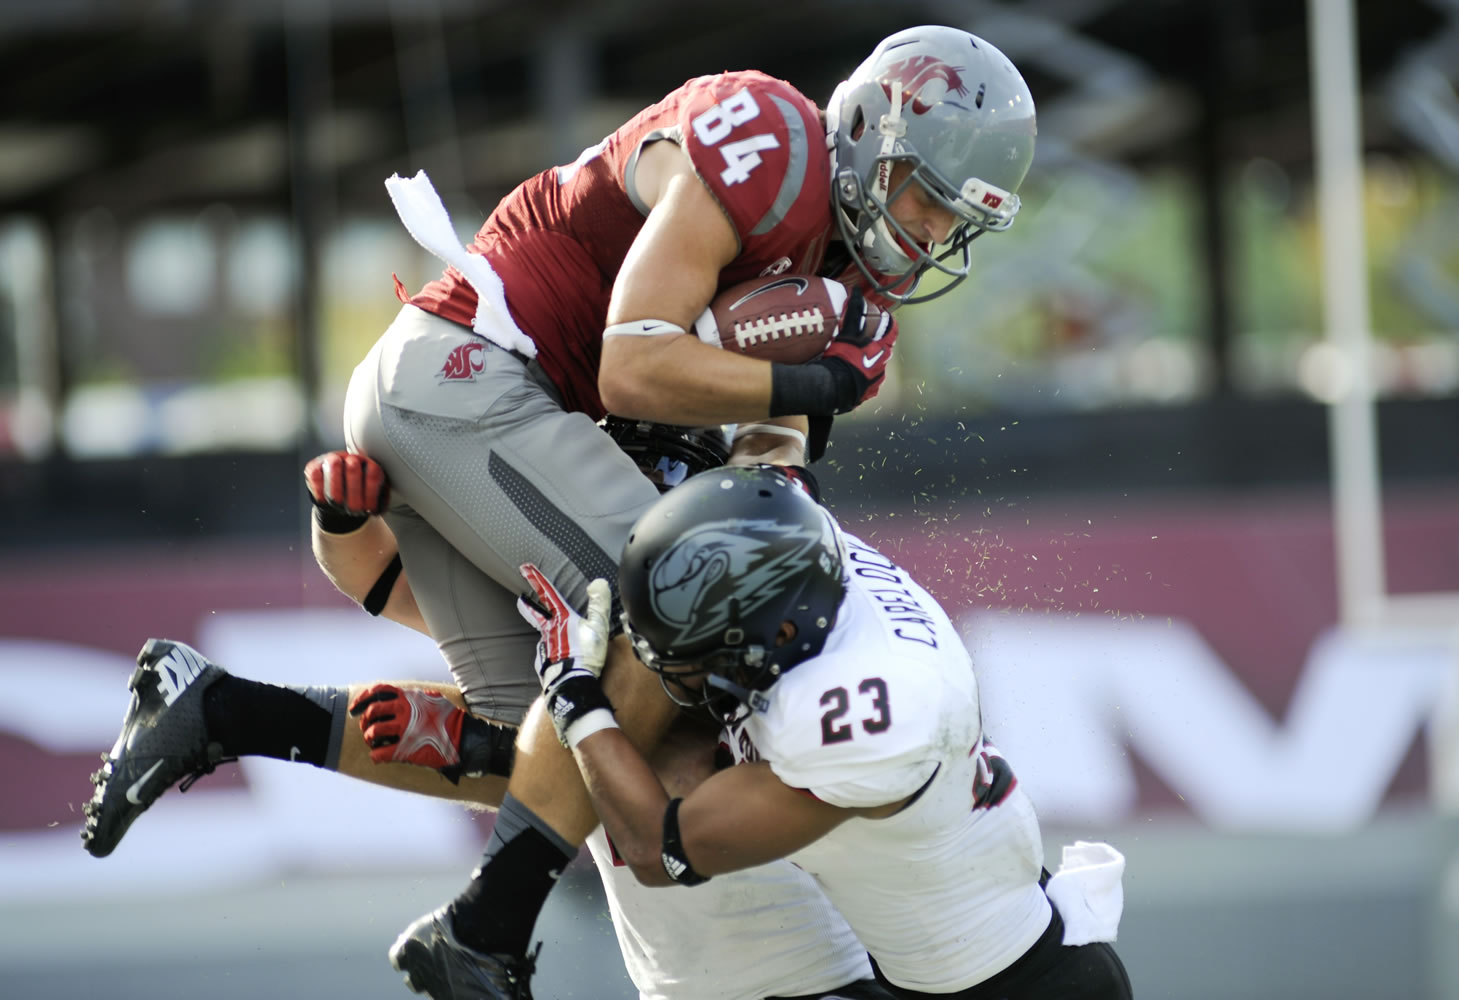 Washington State's River Cracraft is forced out of bounds by Southern Utah's Myles Carelock (23) and Matt Holley (7) during the first half Saturday.